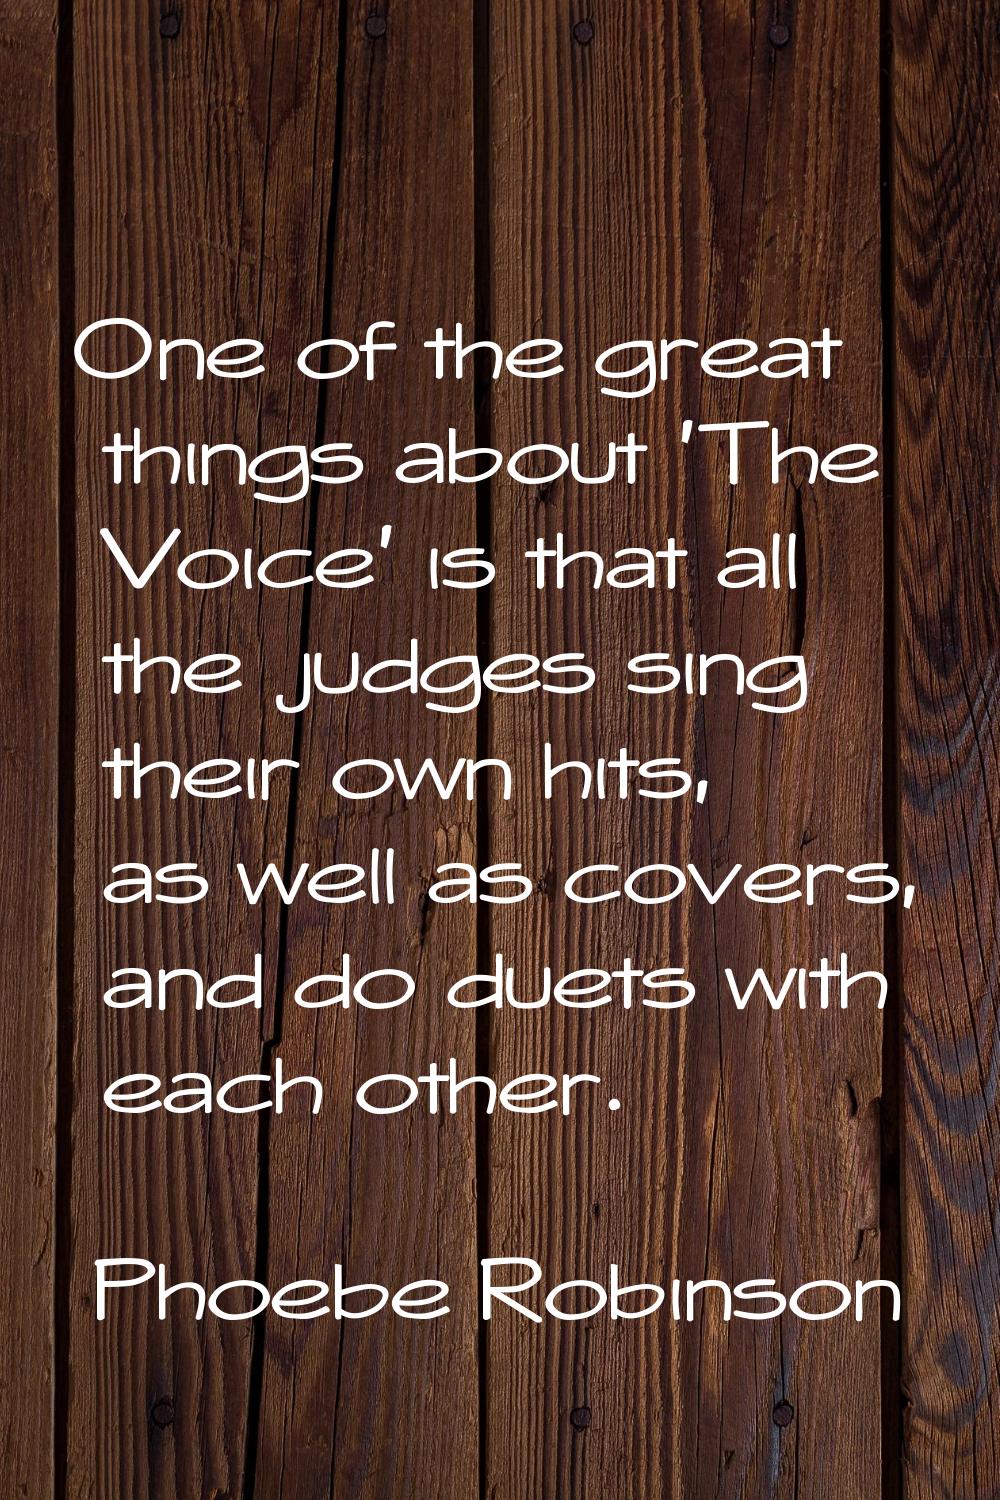 One of the great things about 'The Voice' is that all the judges sing their own hits, as well as co